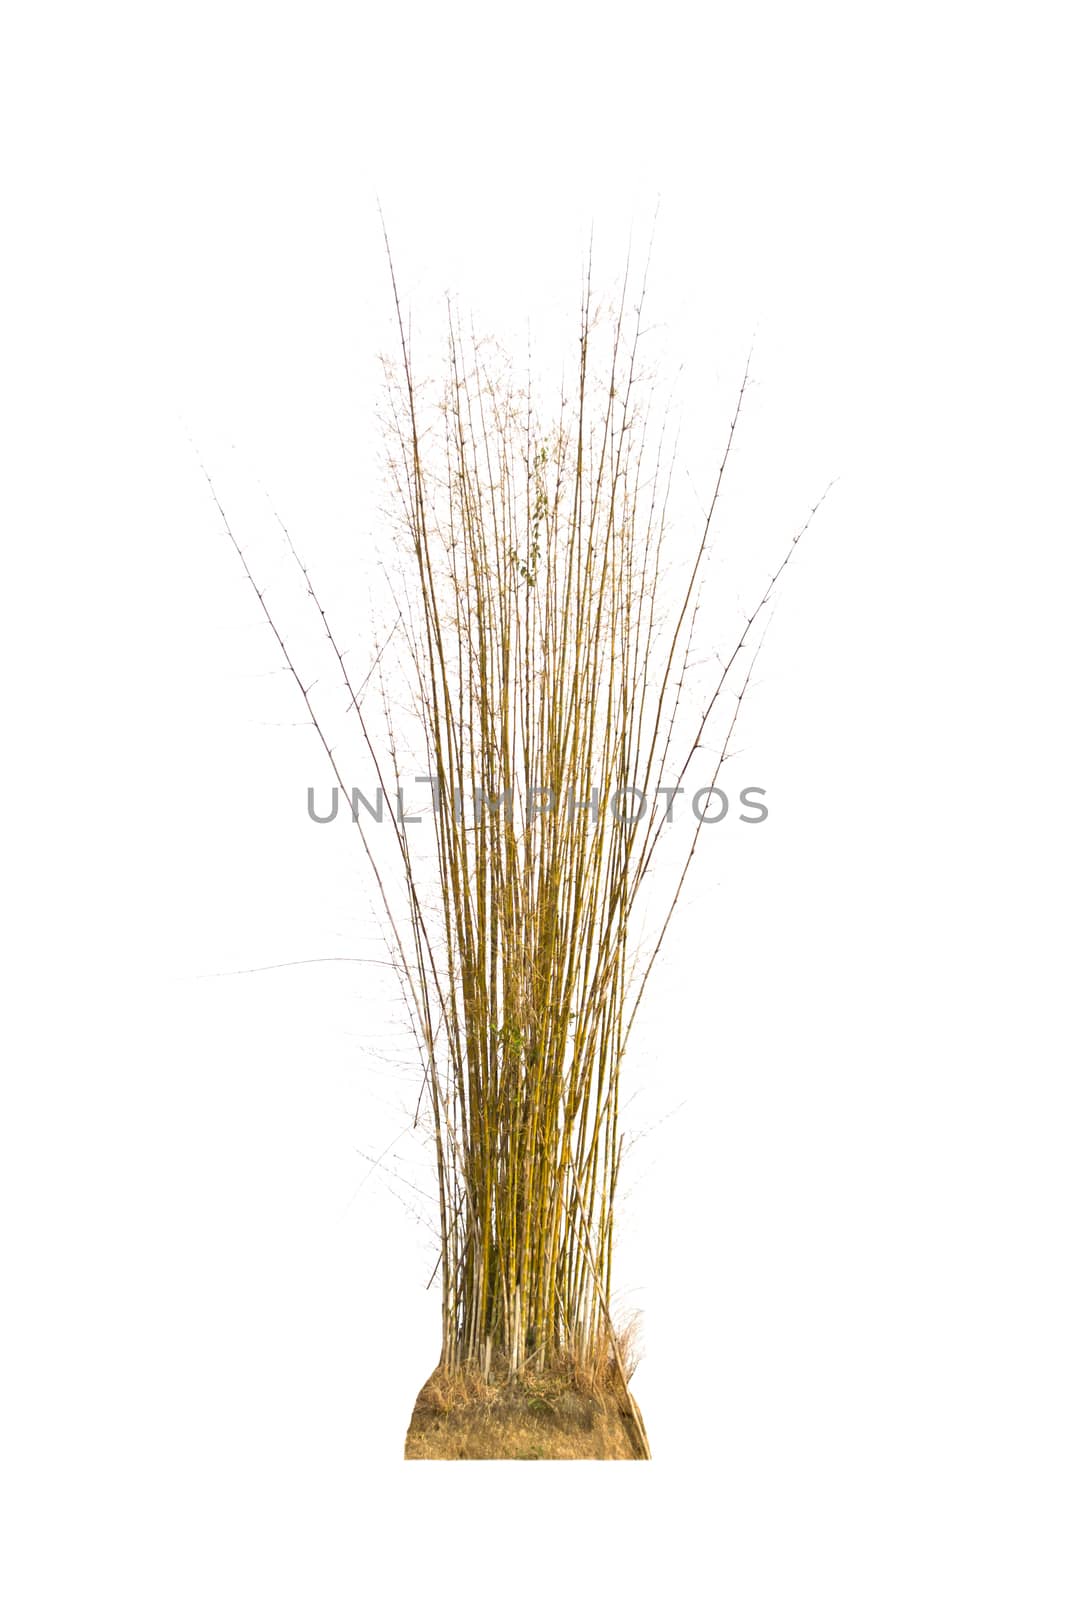 Bamboo tree isolate on a white background